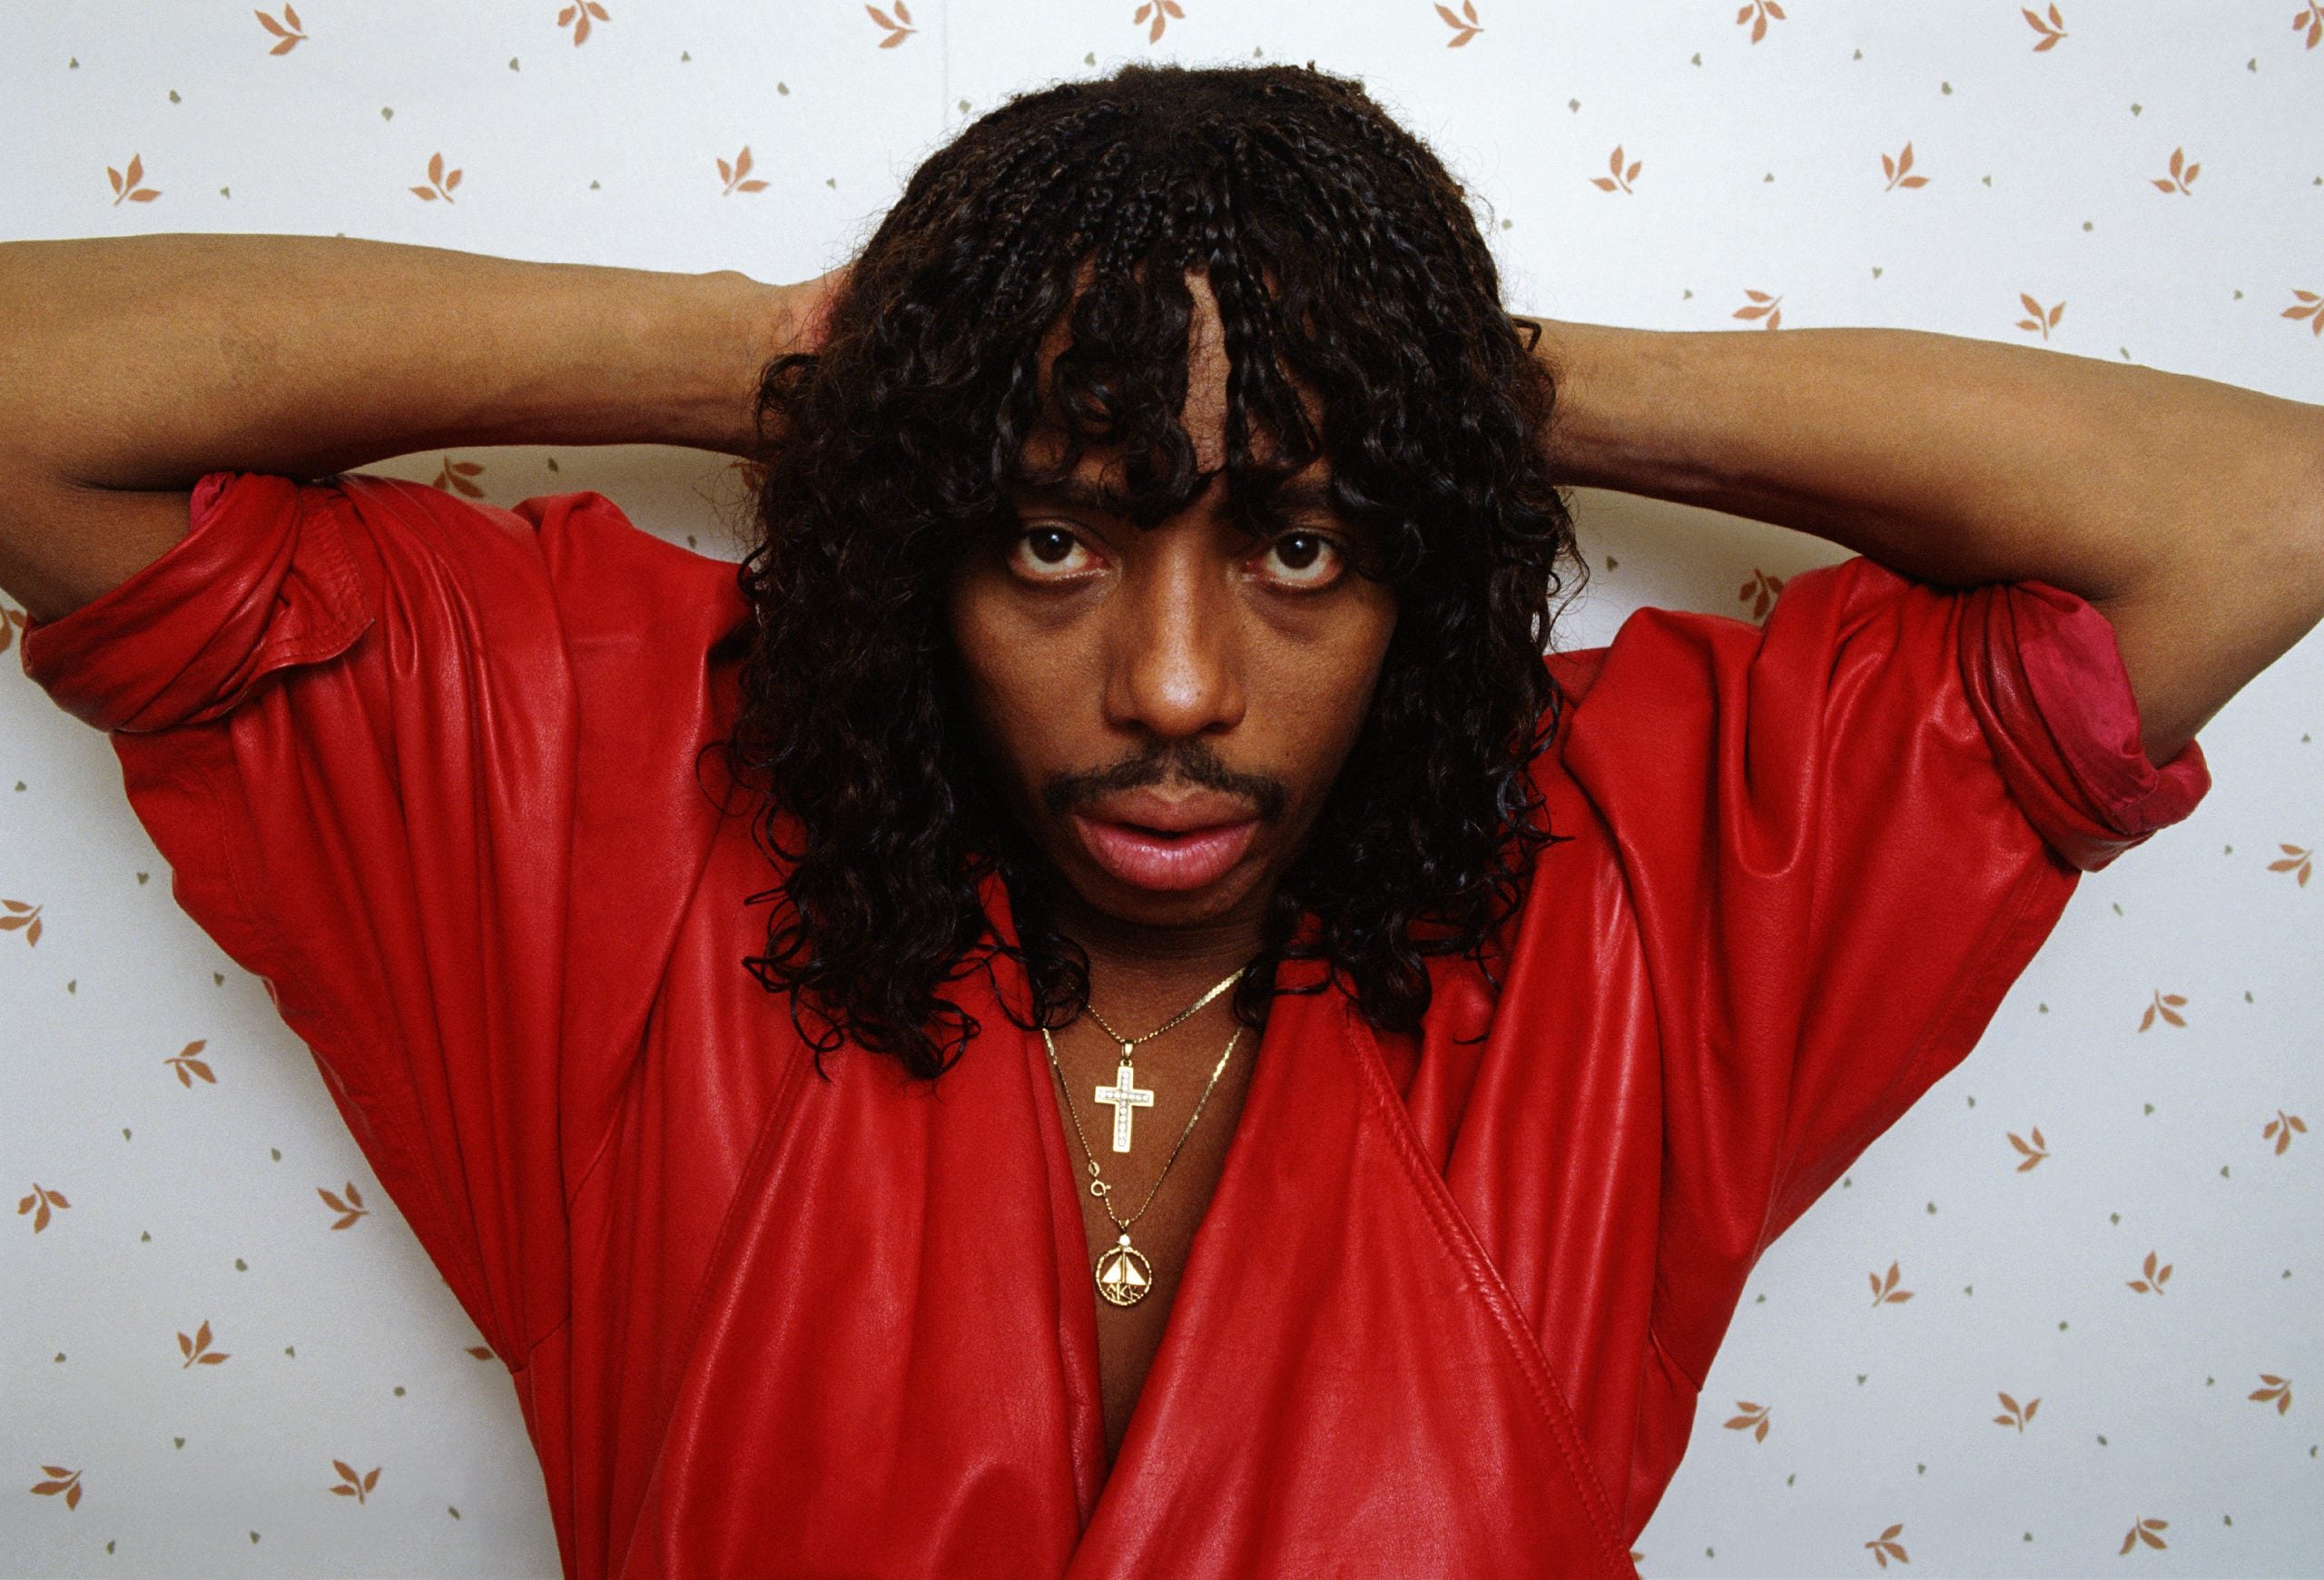 Rick James Accused of Rape By Then-Teen 15 Years After His Death